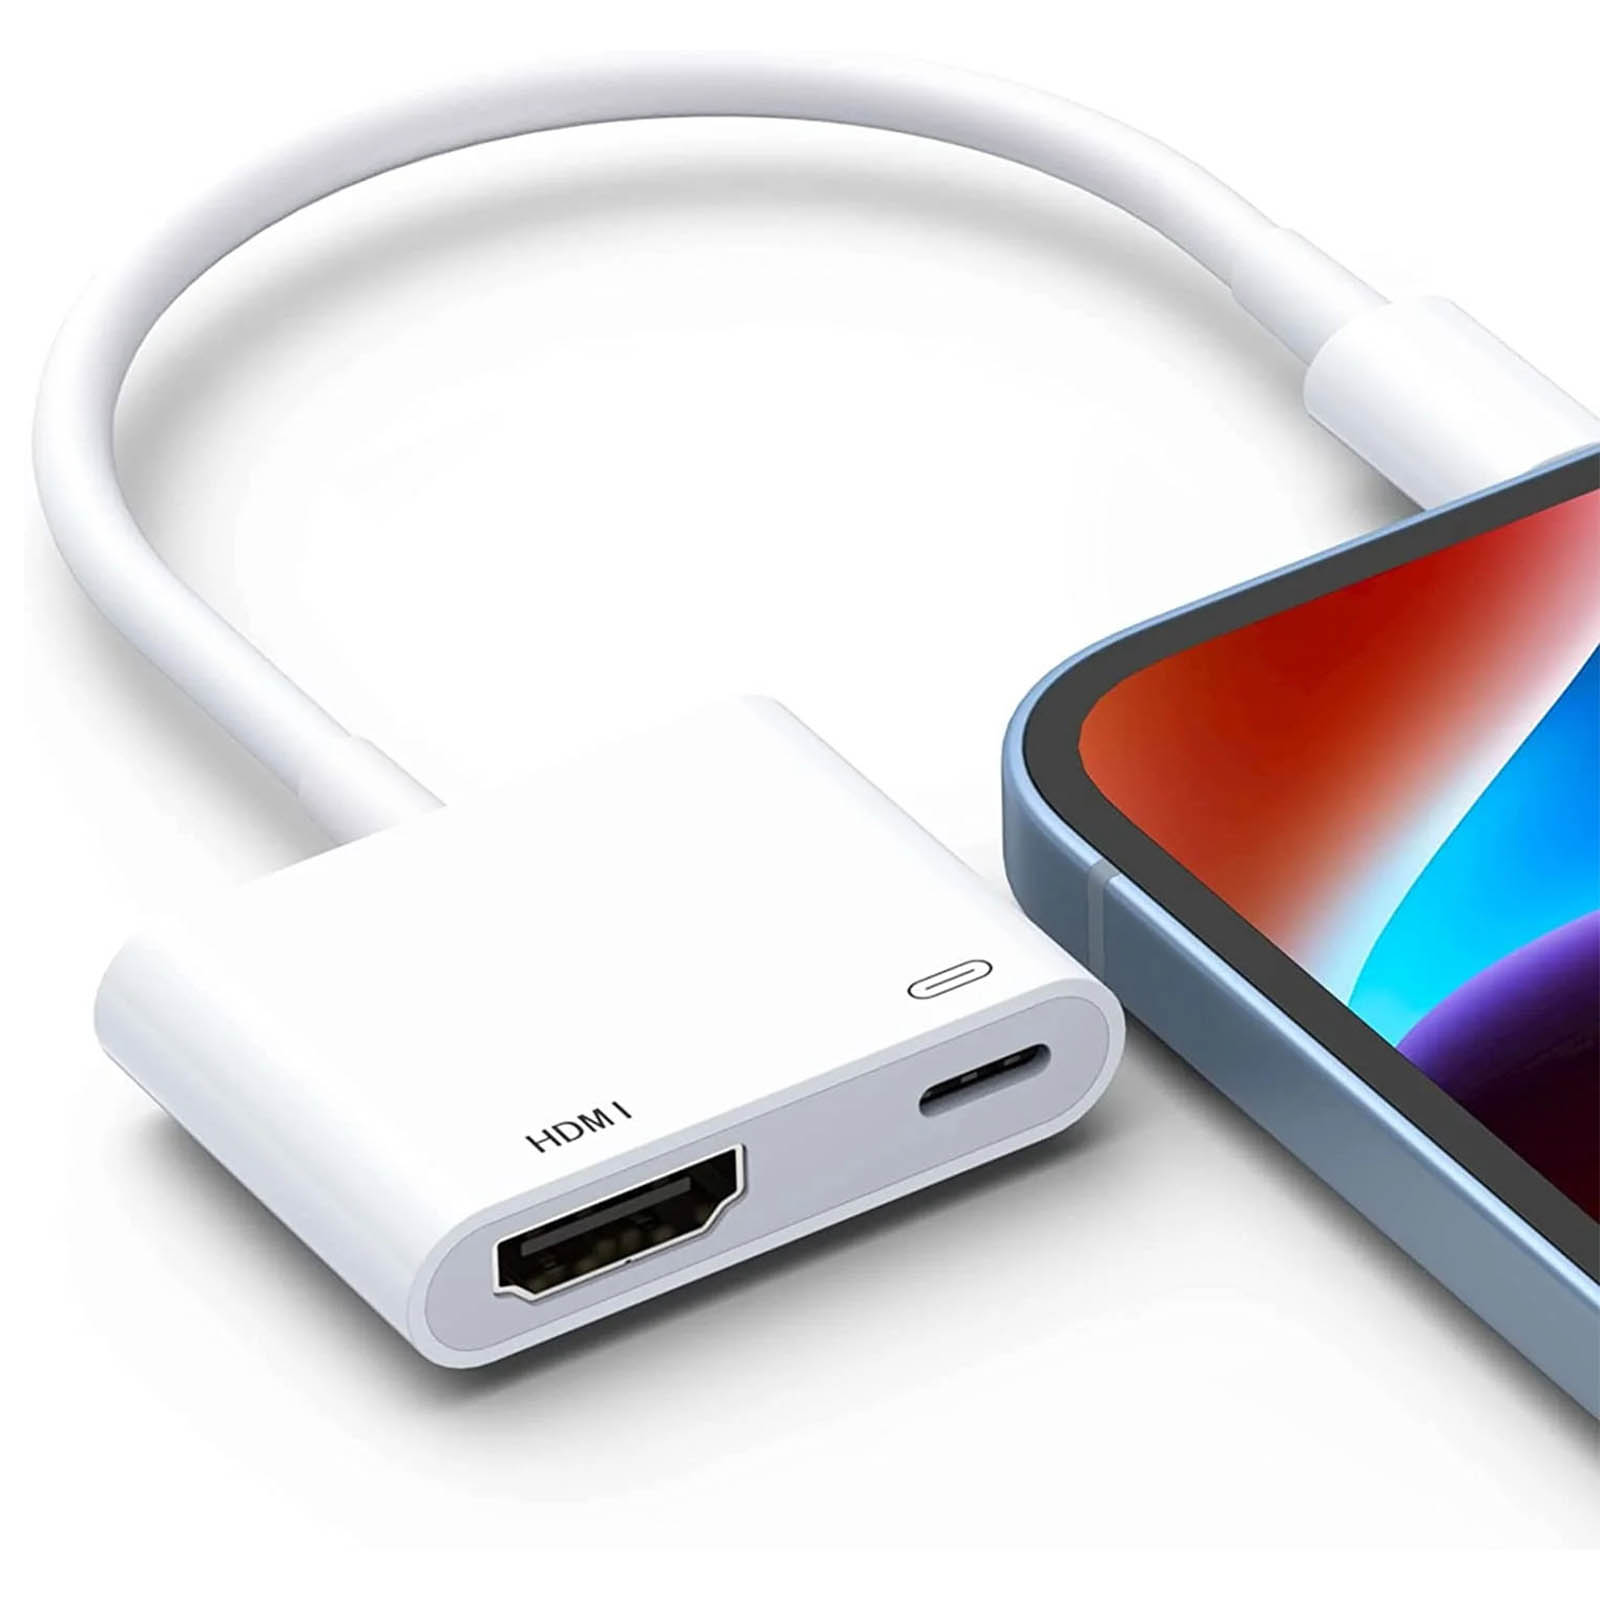 Adaptateur Vidéo iPhone vers HDMI + Lightning, Max excell - Blanc